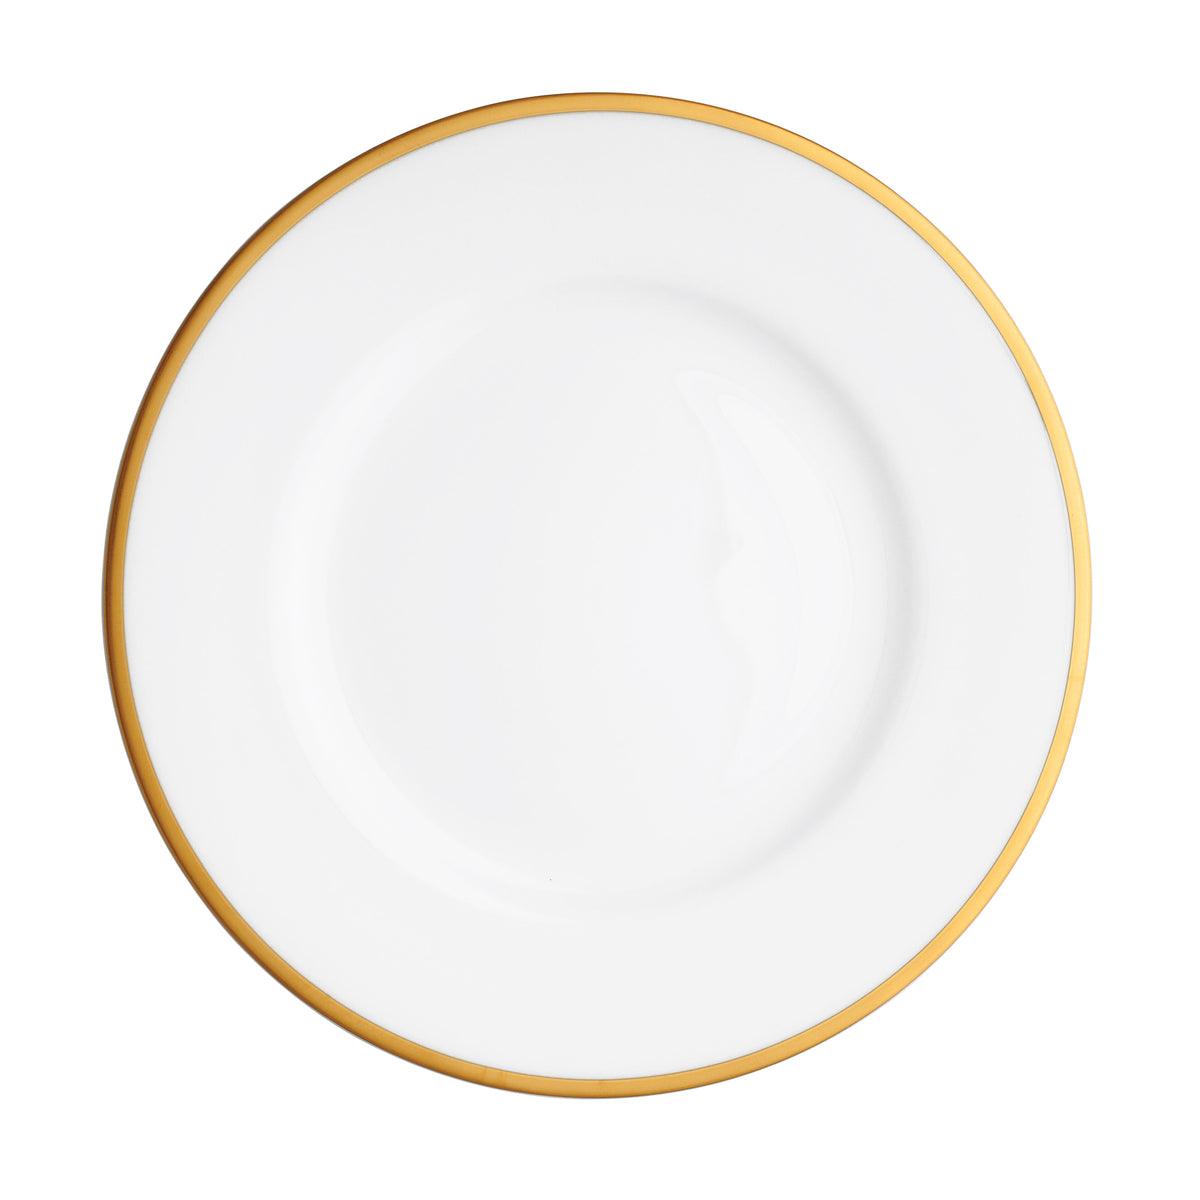 Prouna Comet Gold Dinner Plate White Background Photo